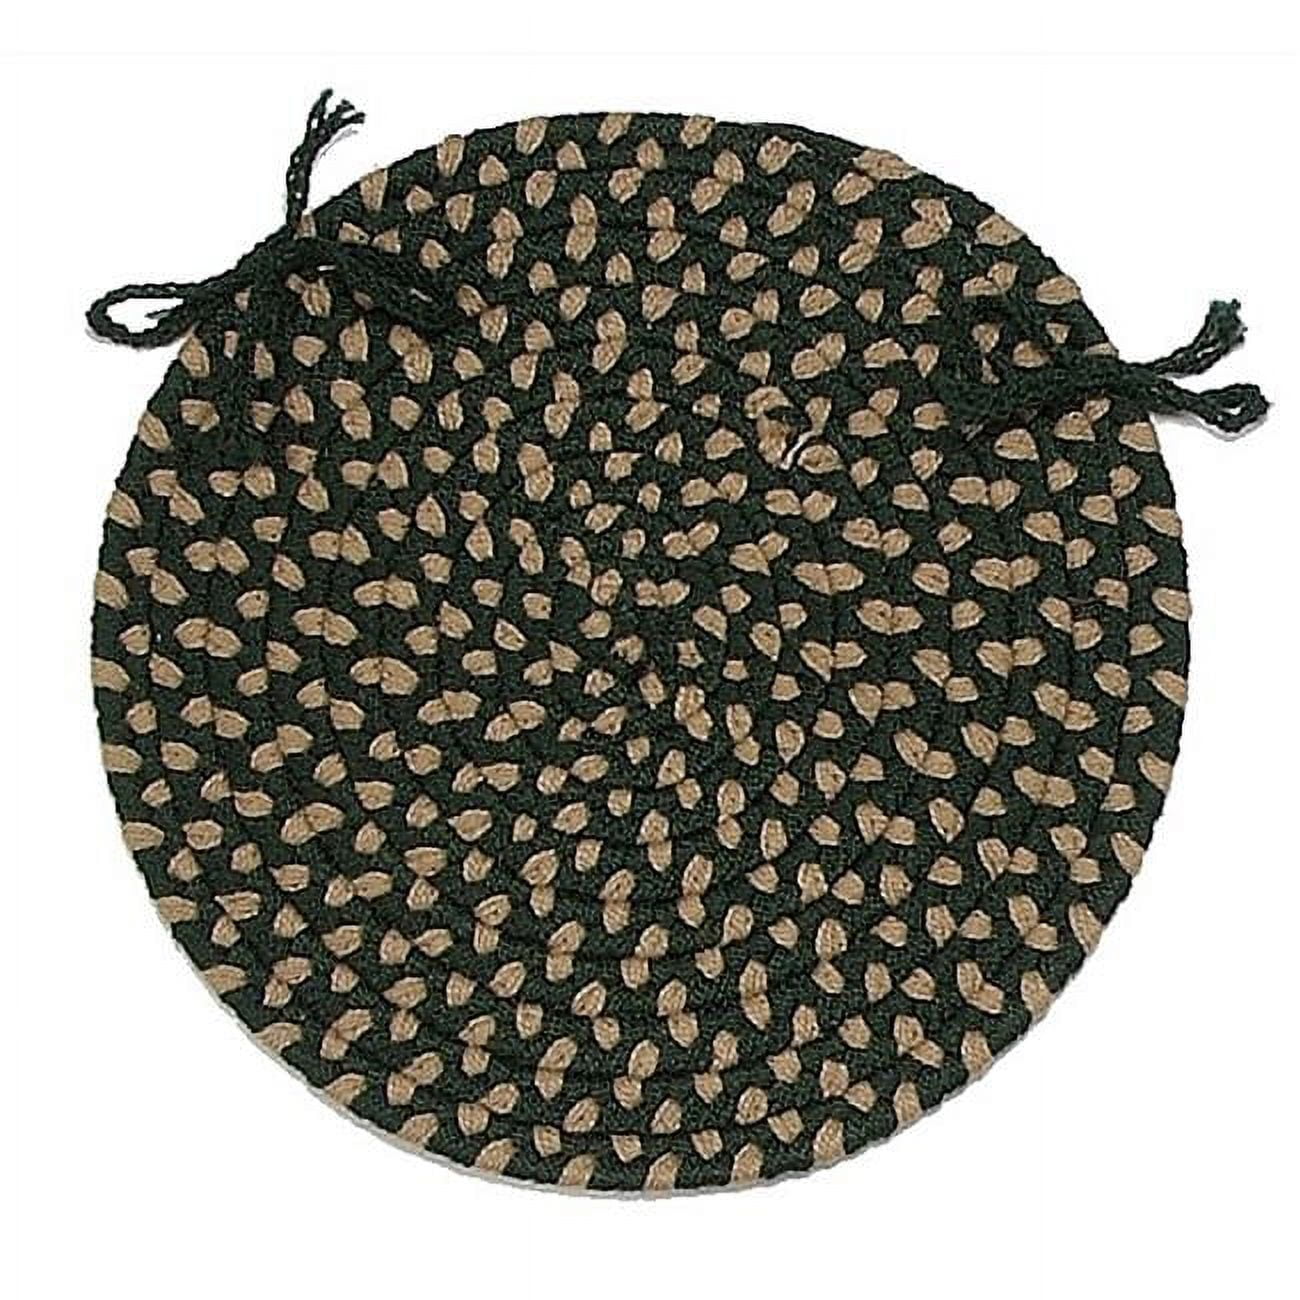 Bf62r036x036 3 Ft. Brook Farm Round Area Rug, Winter Green